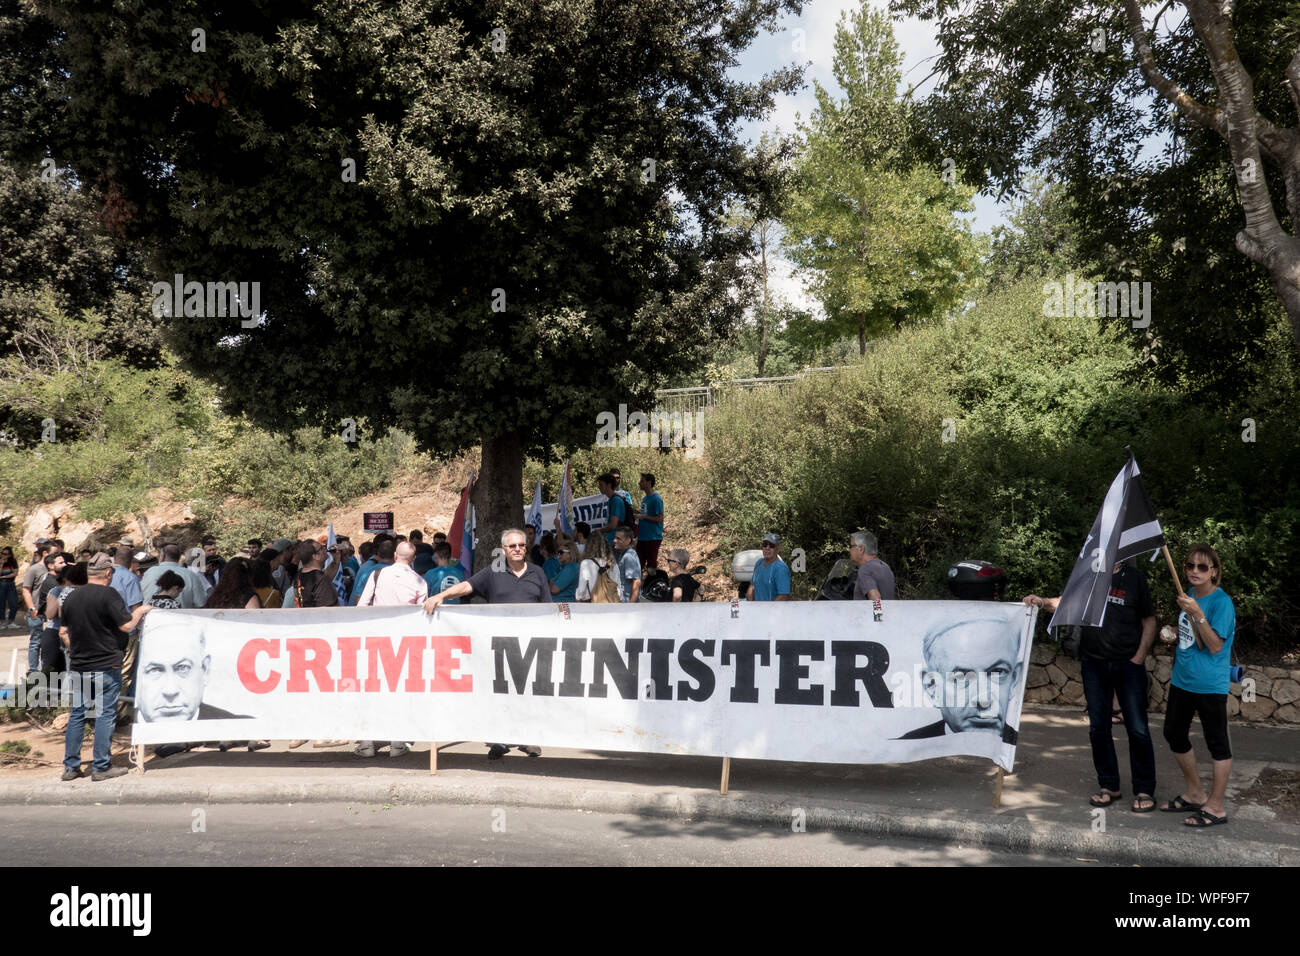 Jerusalem, Israel. 9th September, 2019. Democratic Union activists protest against PM Netanyahu citing criminal suspicions, immoral campaigning and a blitz attempt to legislate the allowance of cameras inside election ballot booths. An assortment of political parties demonstrated in front of the Israeli Parliament building with similar messages ahead of round two of the national elections for parliament scheduled for 17th September, 2019. Credit: Nir Alon/Alamy Live News. Credit: Nir Alon/Alamy Live News Stock Photo